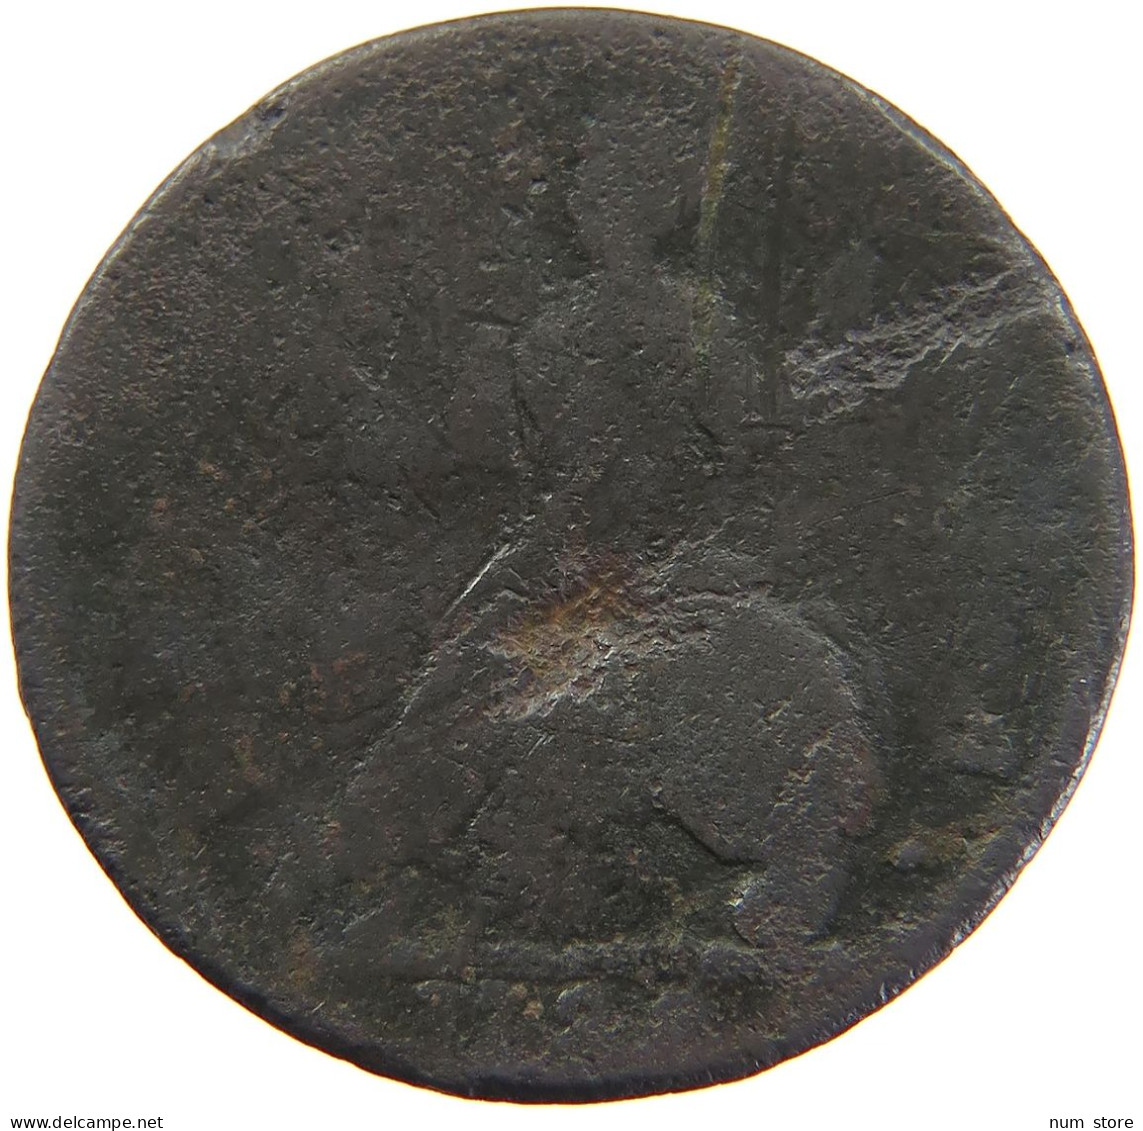 GREAT BRITAIN HALFPENNY 172. GEORGE I. #s082 0071 - B. 1/2 Penny